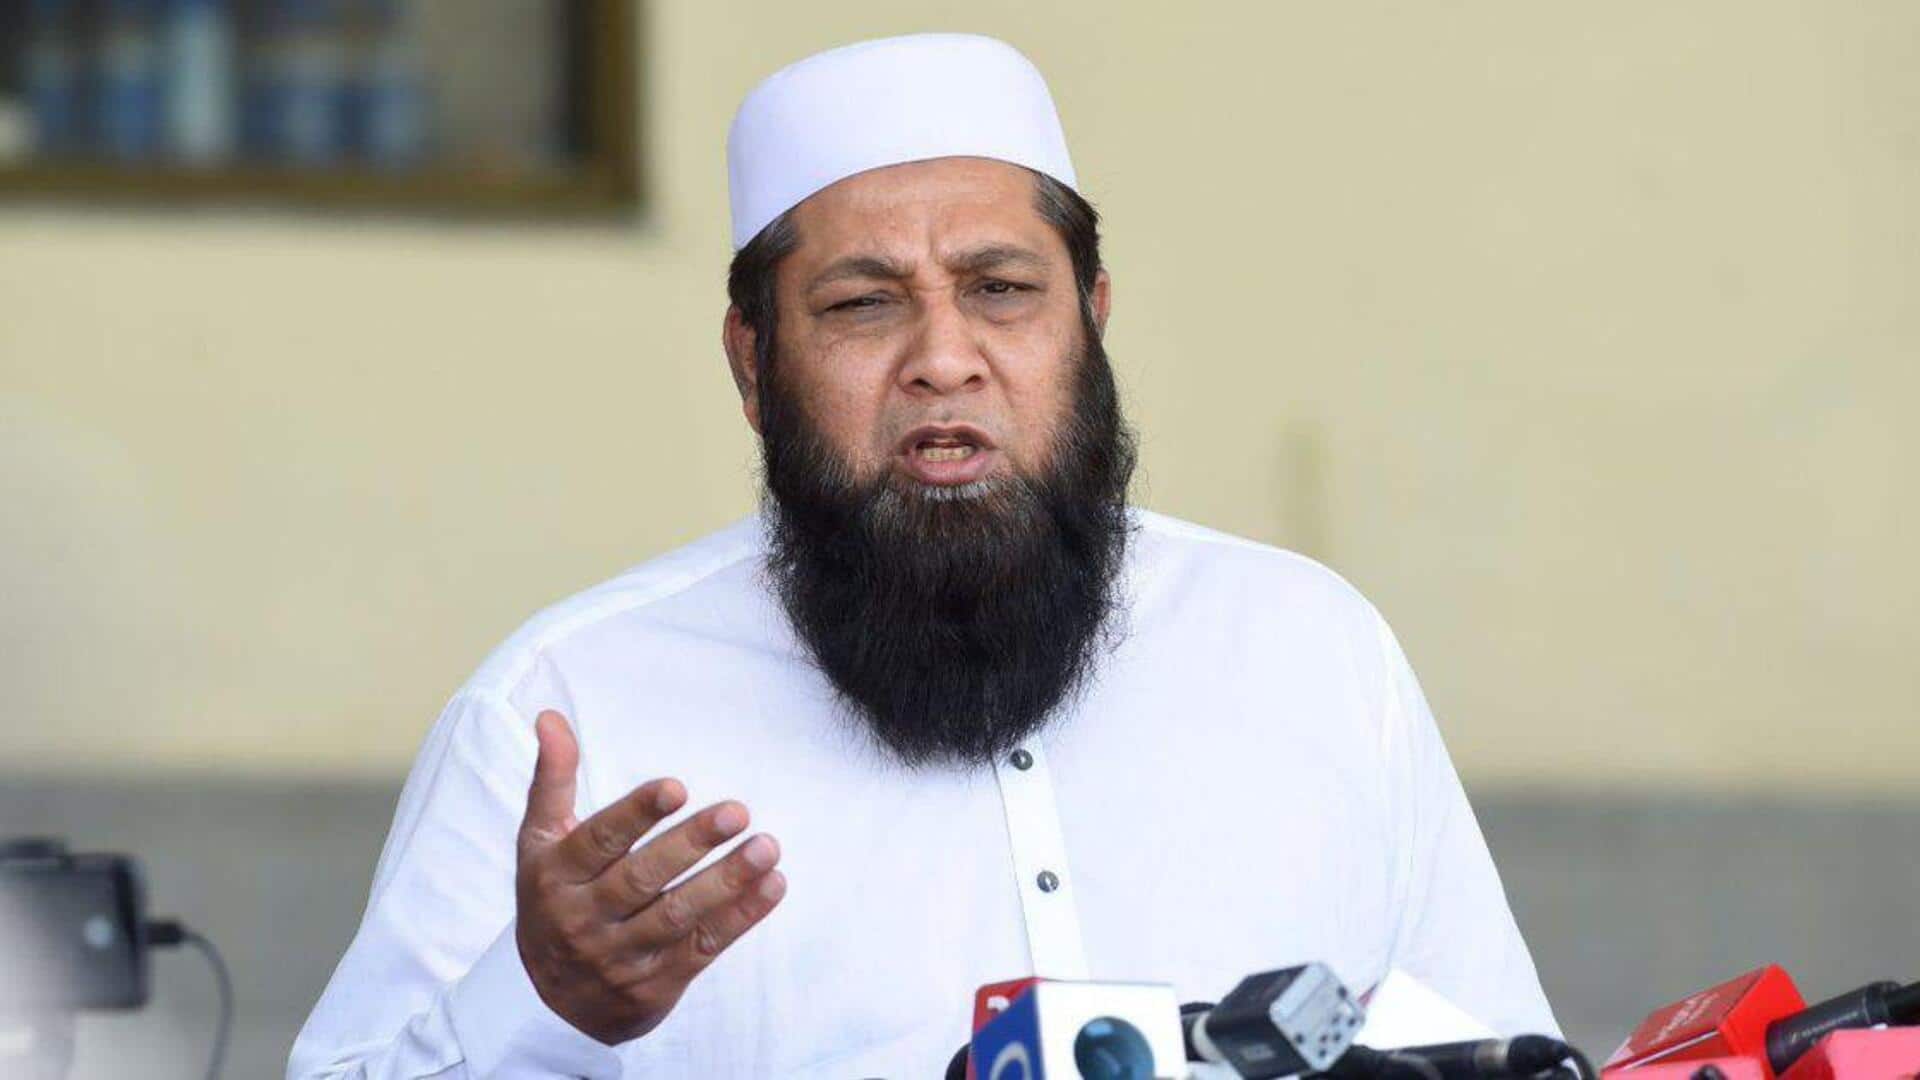 Inzamam-ul-Haq re-appointed Pakistan cricket team's chief selector: Details here